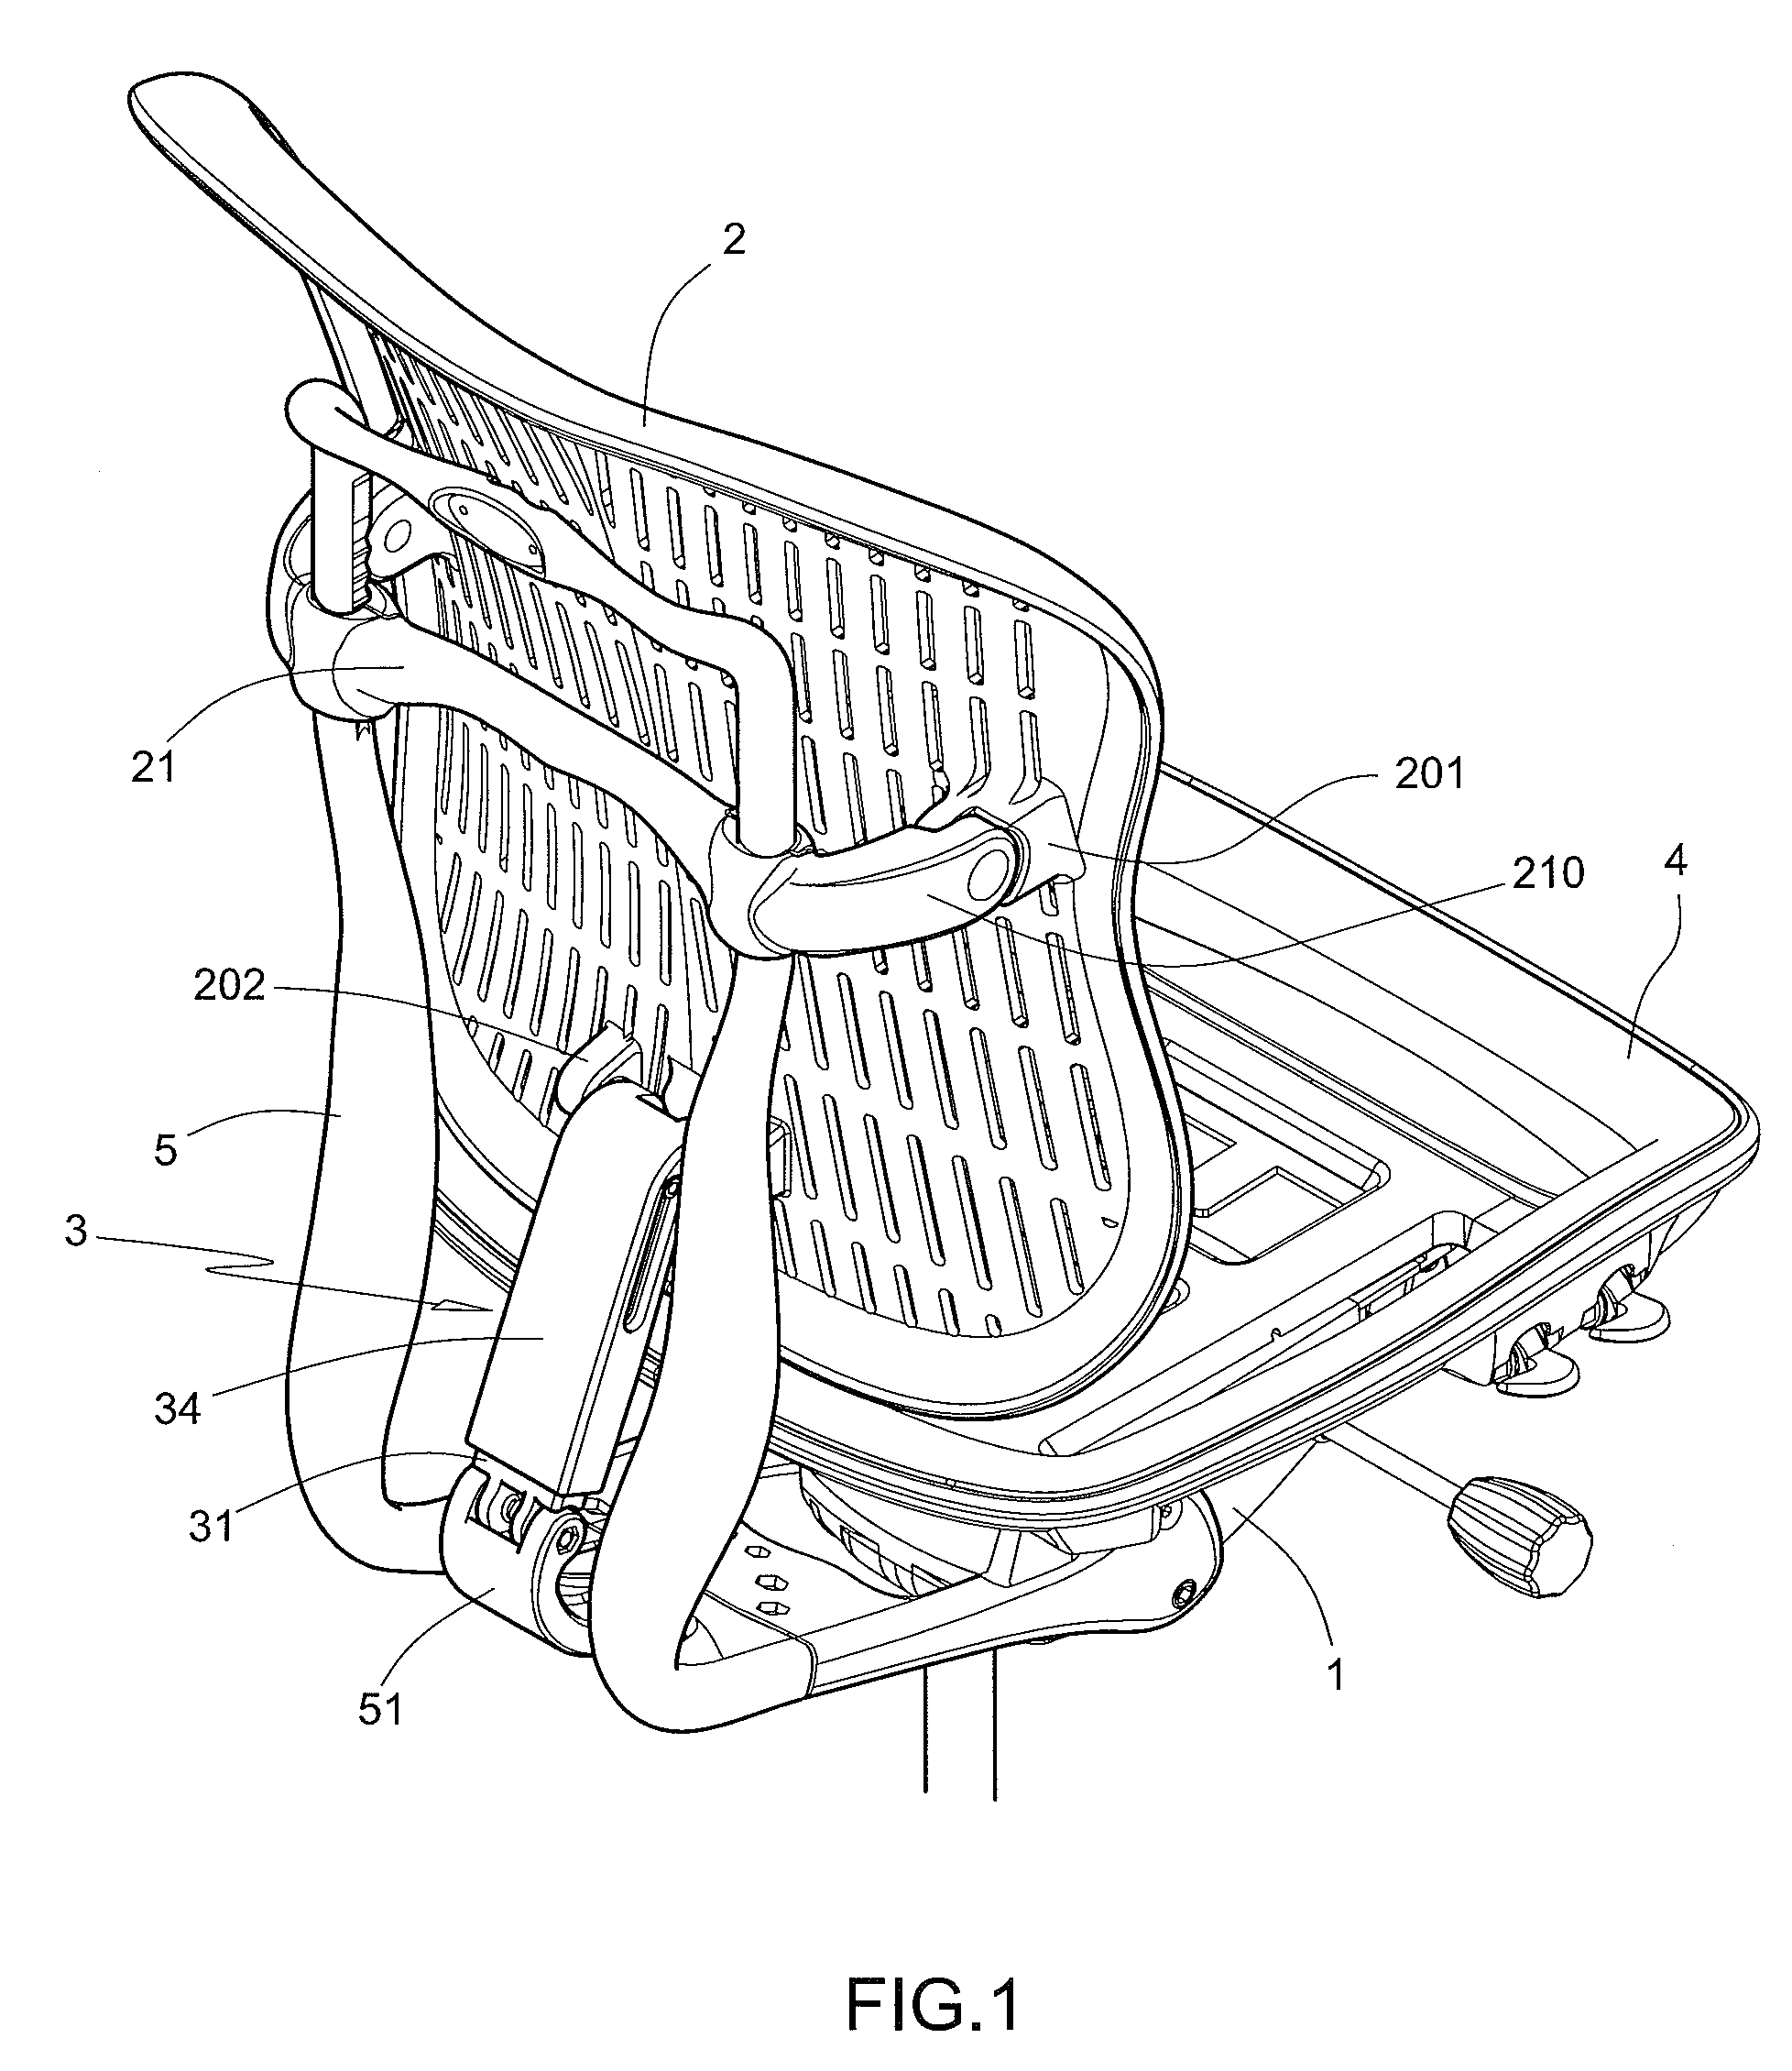 Resilient lower-back supporting device capable of vertical adjustment along with backrest of chair